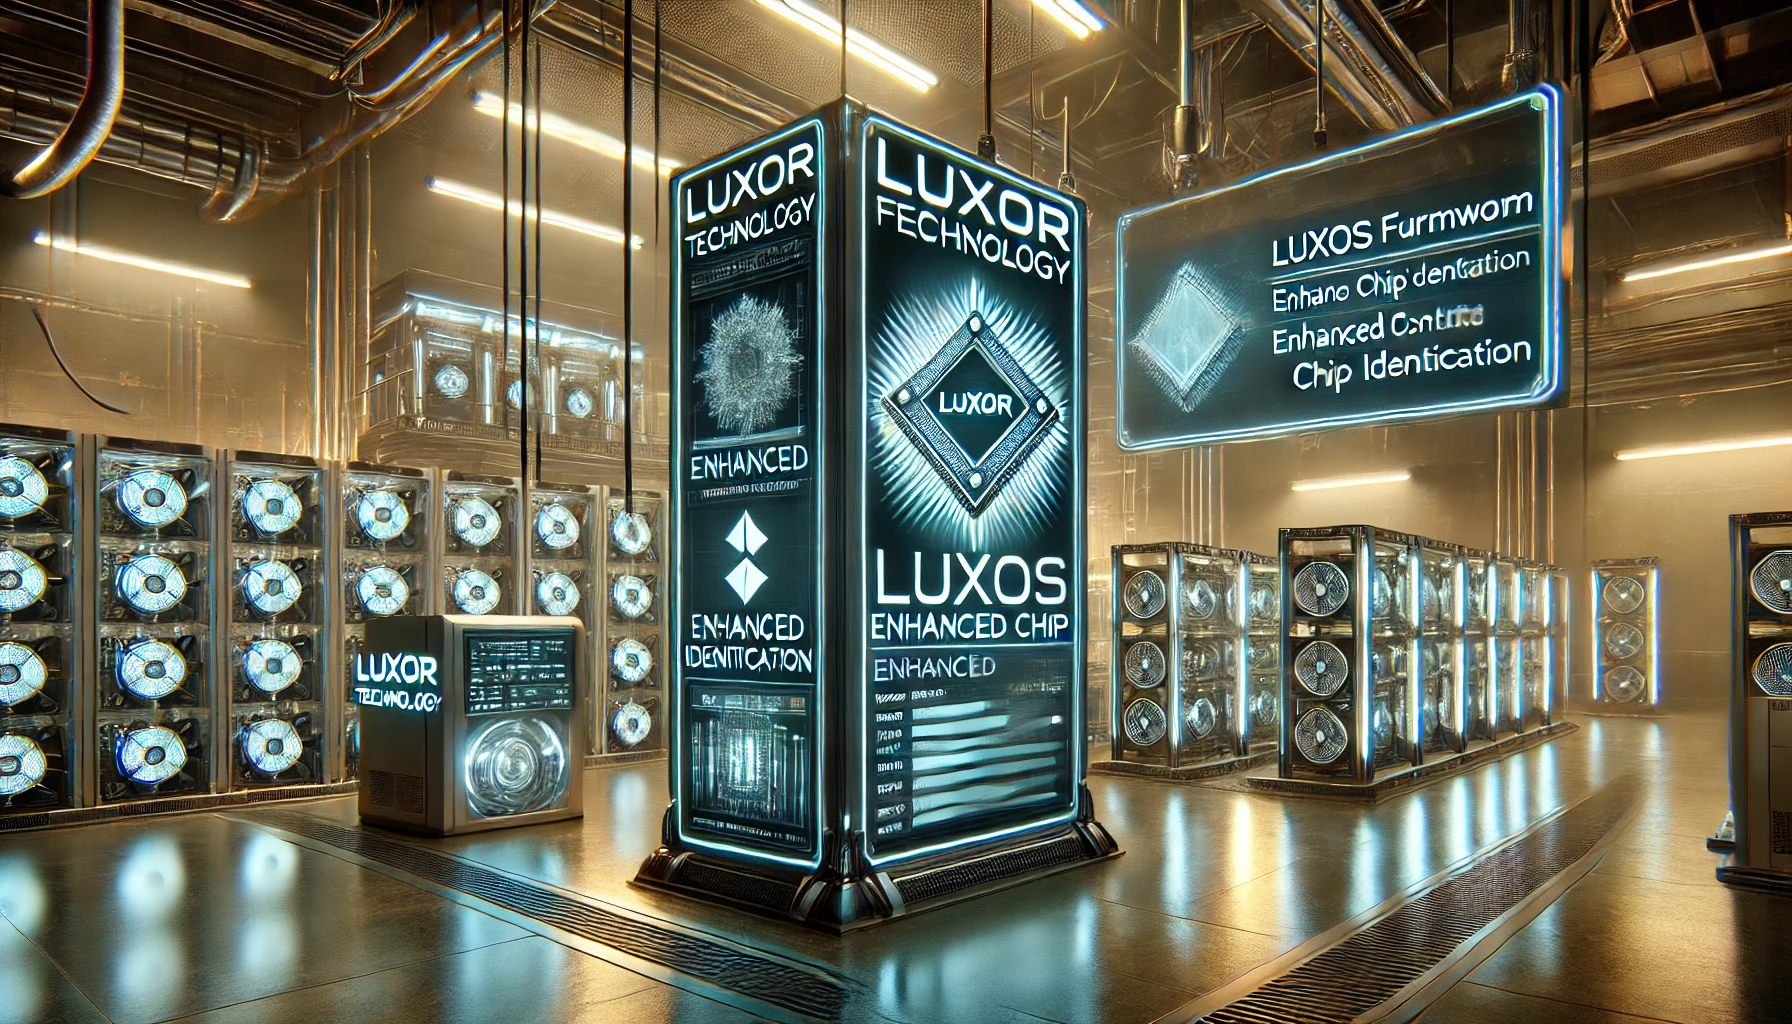 Luxor Technology Releases New LuxOS Firmware with Enhanced Chip Identification